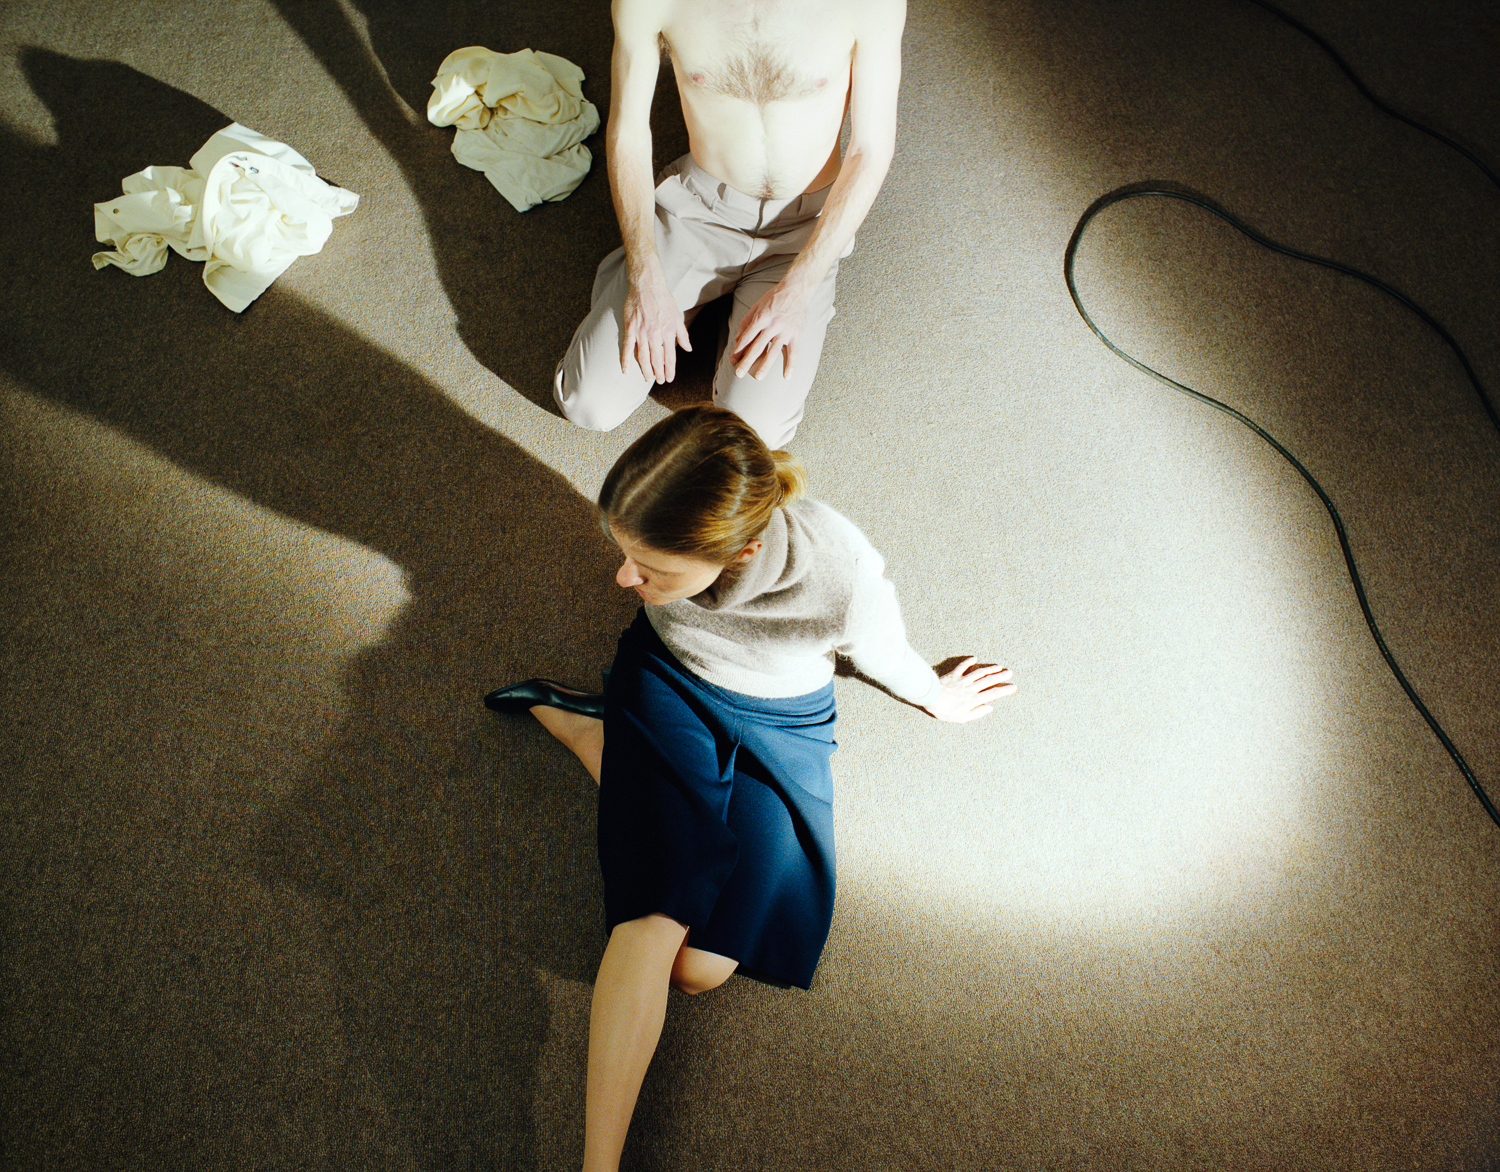 Now and Then © Jo Ann CallisTwo Figures on Carpet, 1979, Archival Pigment Print, 24 x 30 inches